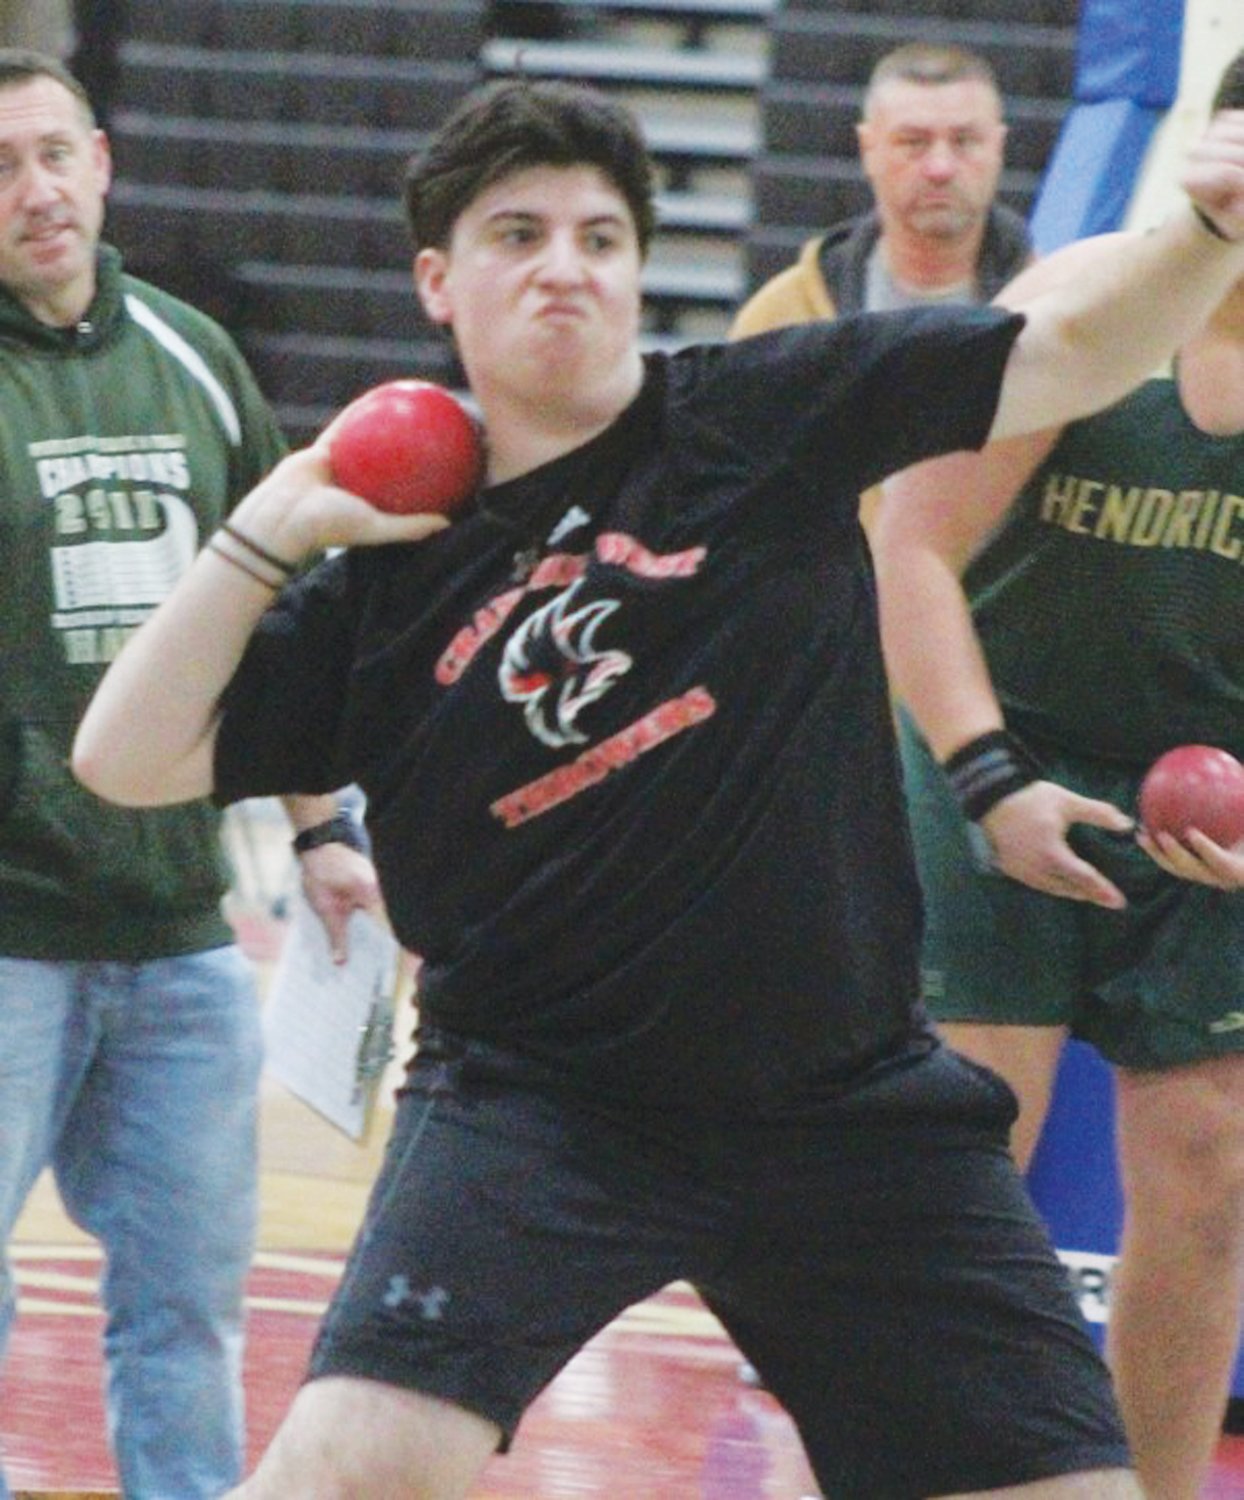 SHOT PUT: Cranston West’s George Grammas competes in the shot put competition for the Falcons. The West and East indoor track teams are getting ready for the upcoming division, class and state championships. (Photos by Alex Sponseller)